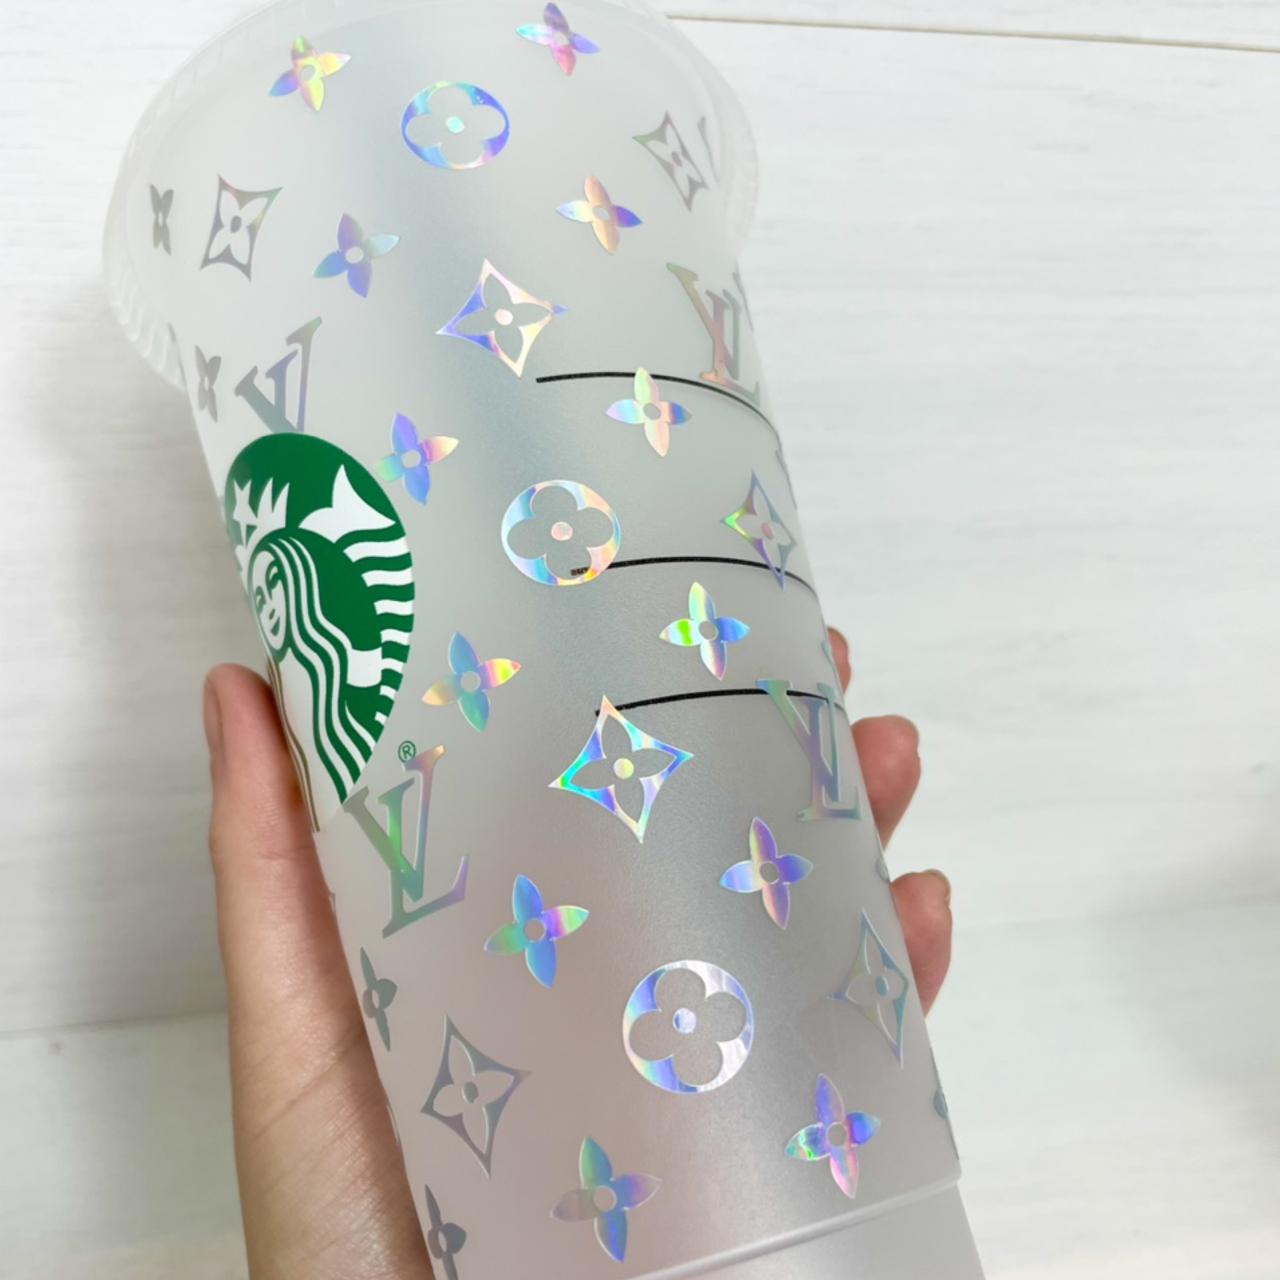 Personalised LV reusable cup